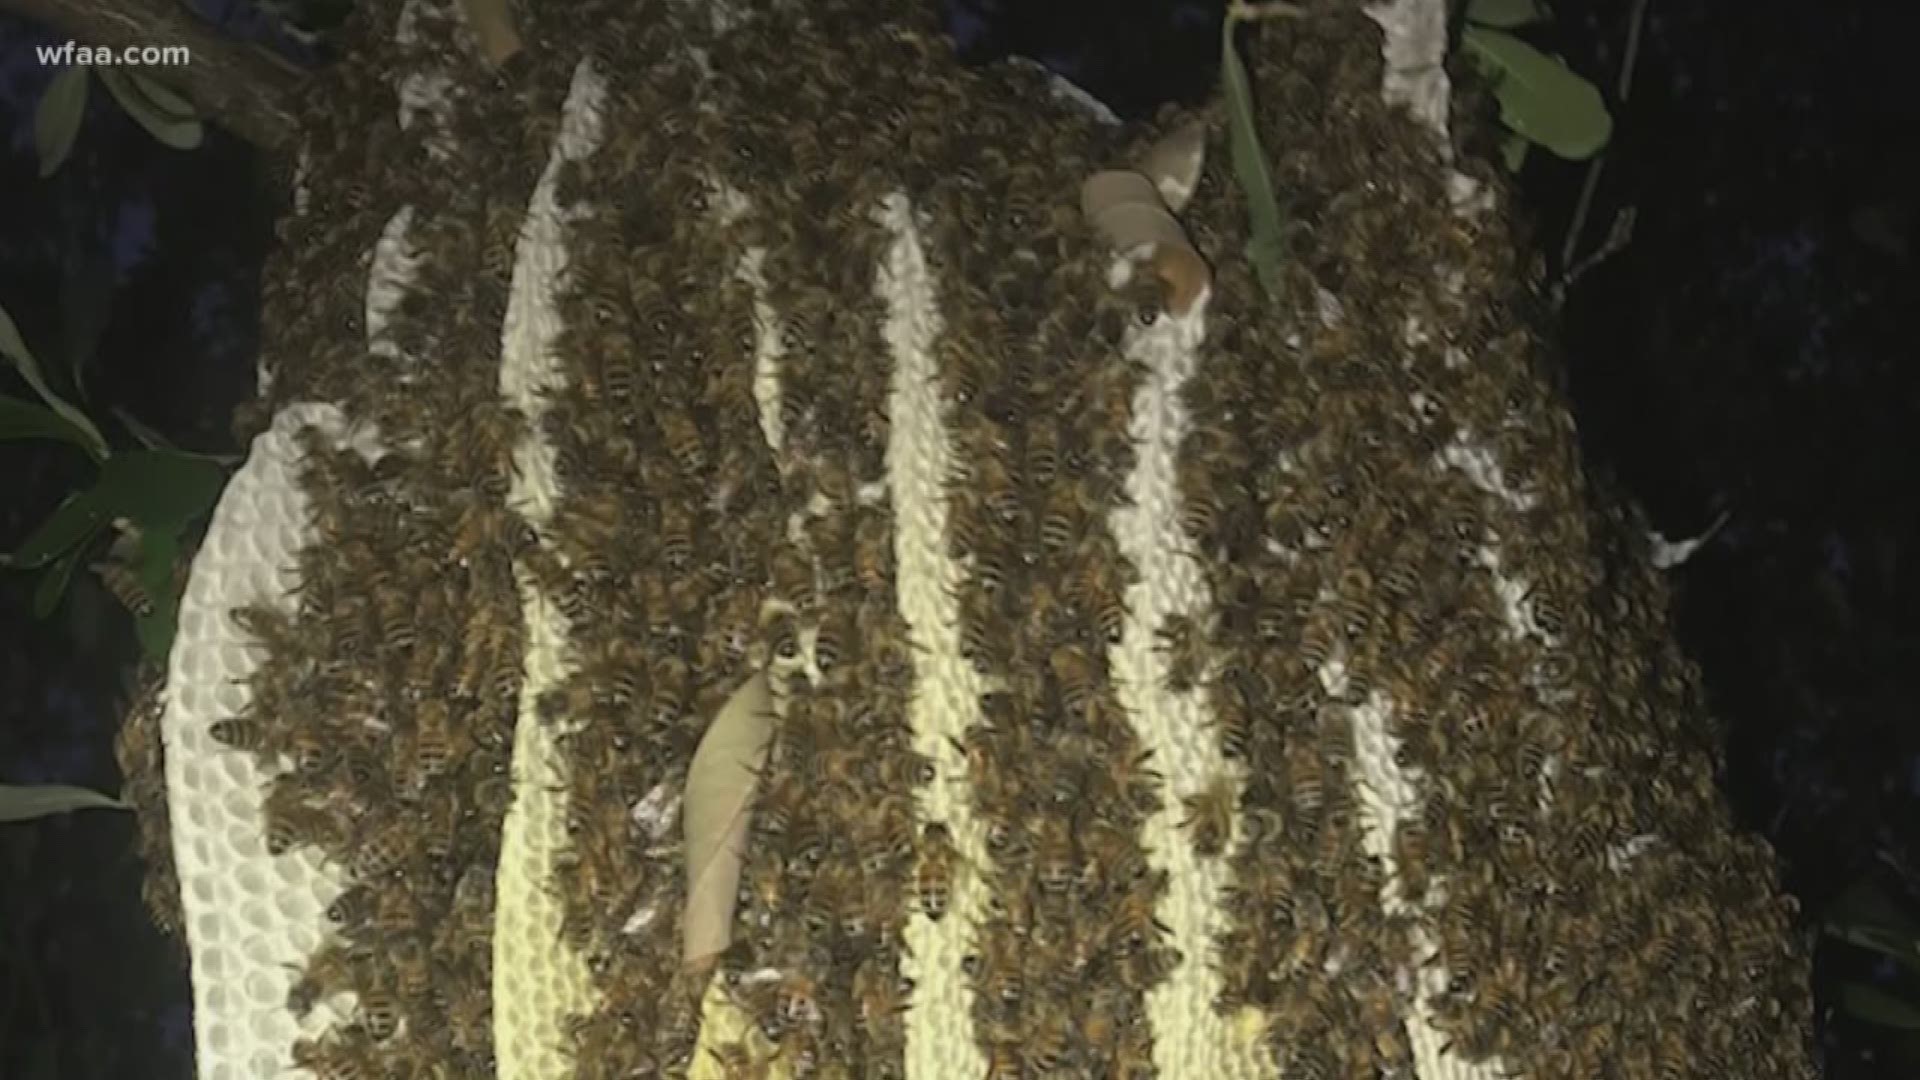 A huge beehive found in Celina, Texas was relocated to McKinney. A beekeeper estimates it carried 15 to 20 honeycombs and about 25,000 bees.